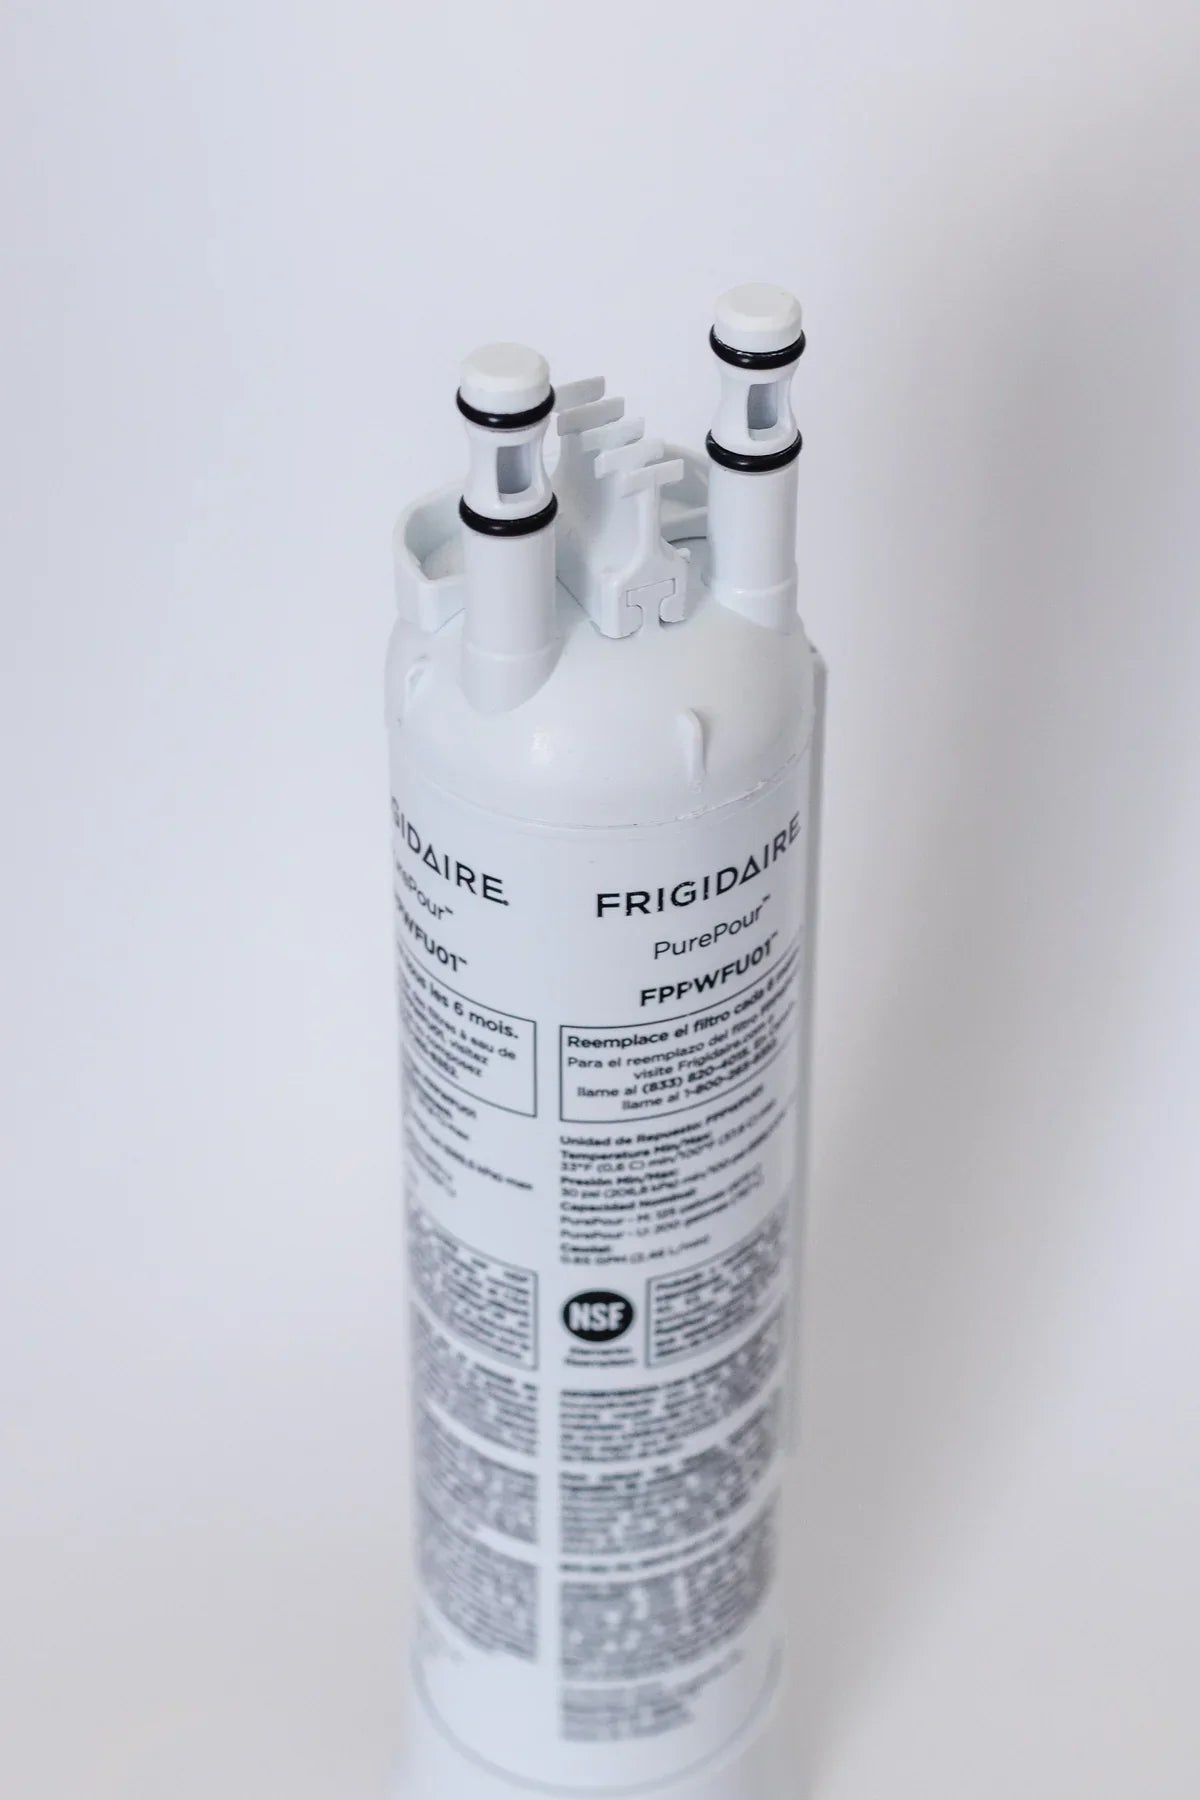 FPPWFU01 Frigidaire PurePour PWF-1 Water Filter